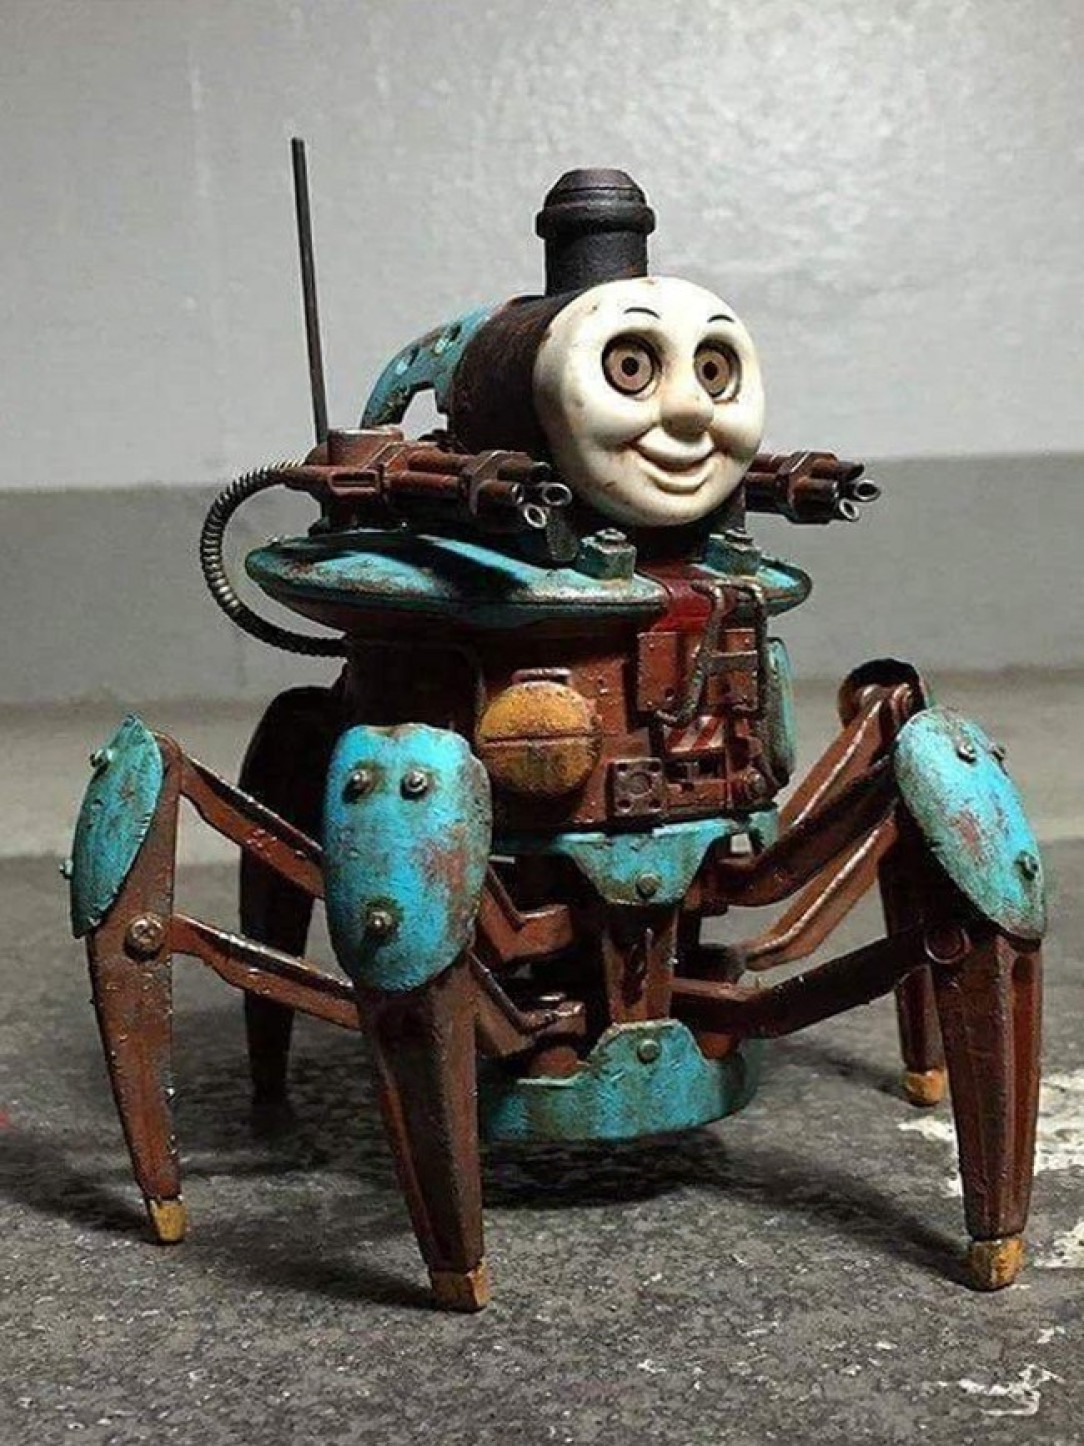 Thomas the tank, scourge of the wastelands